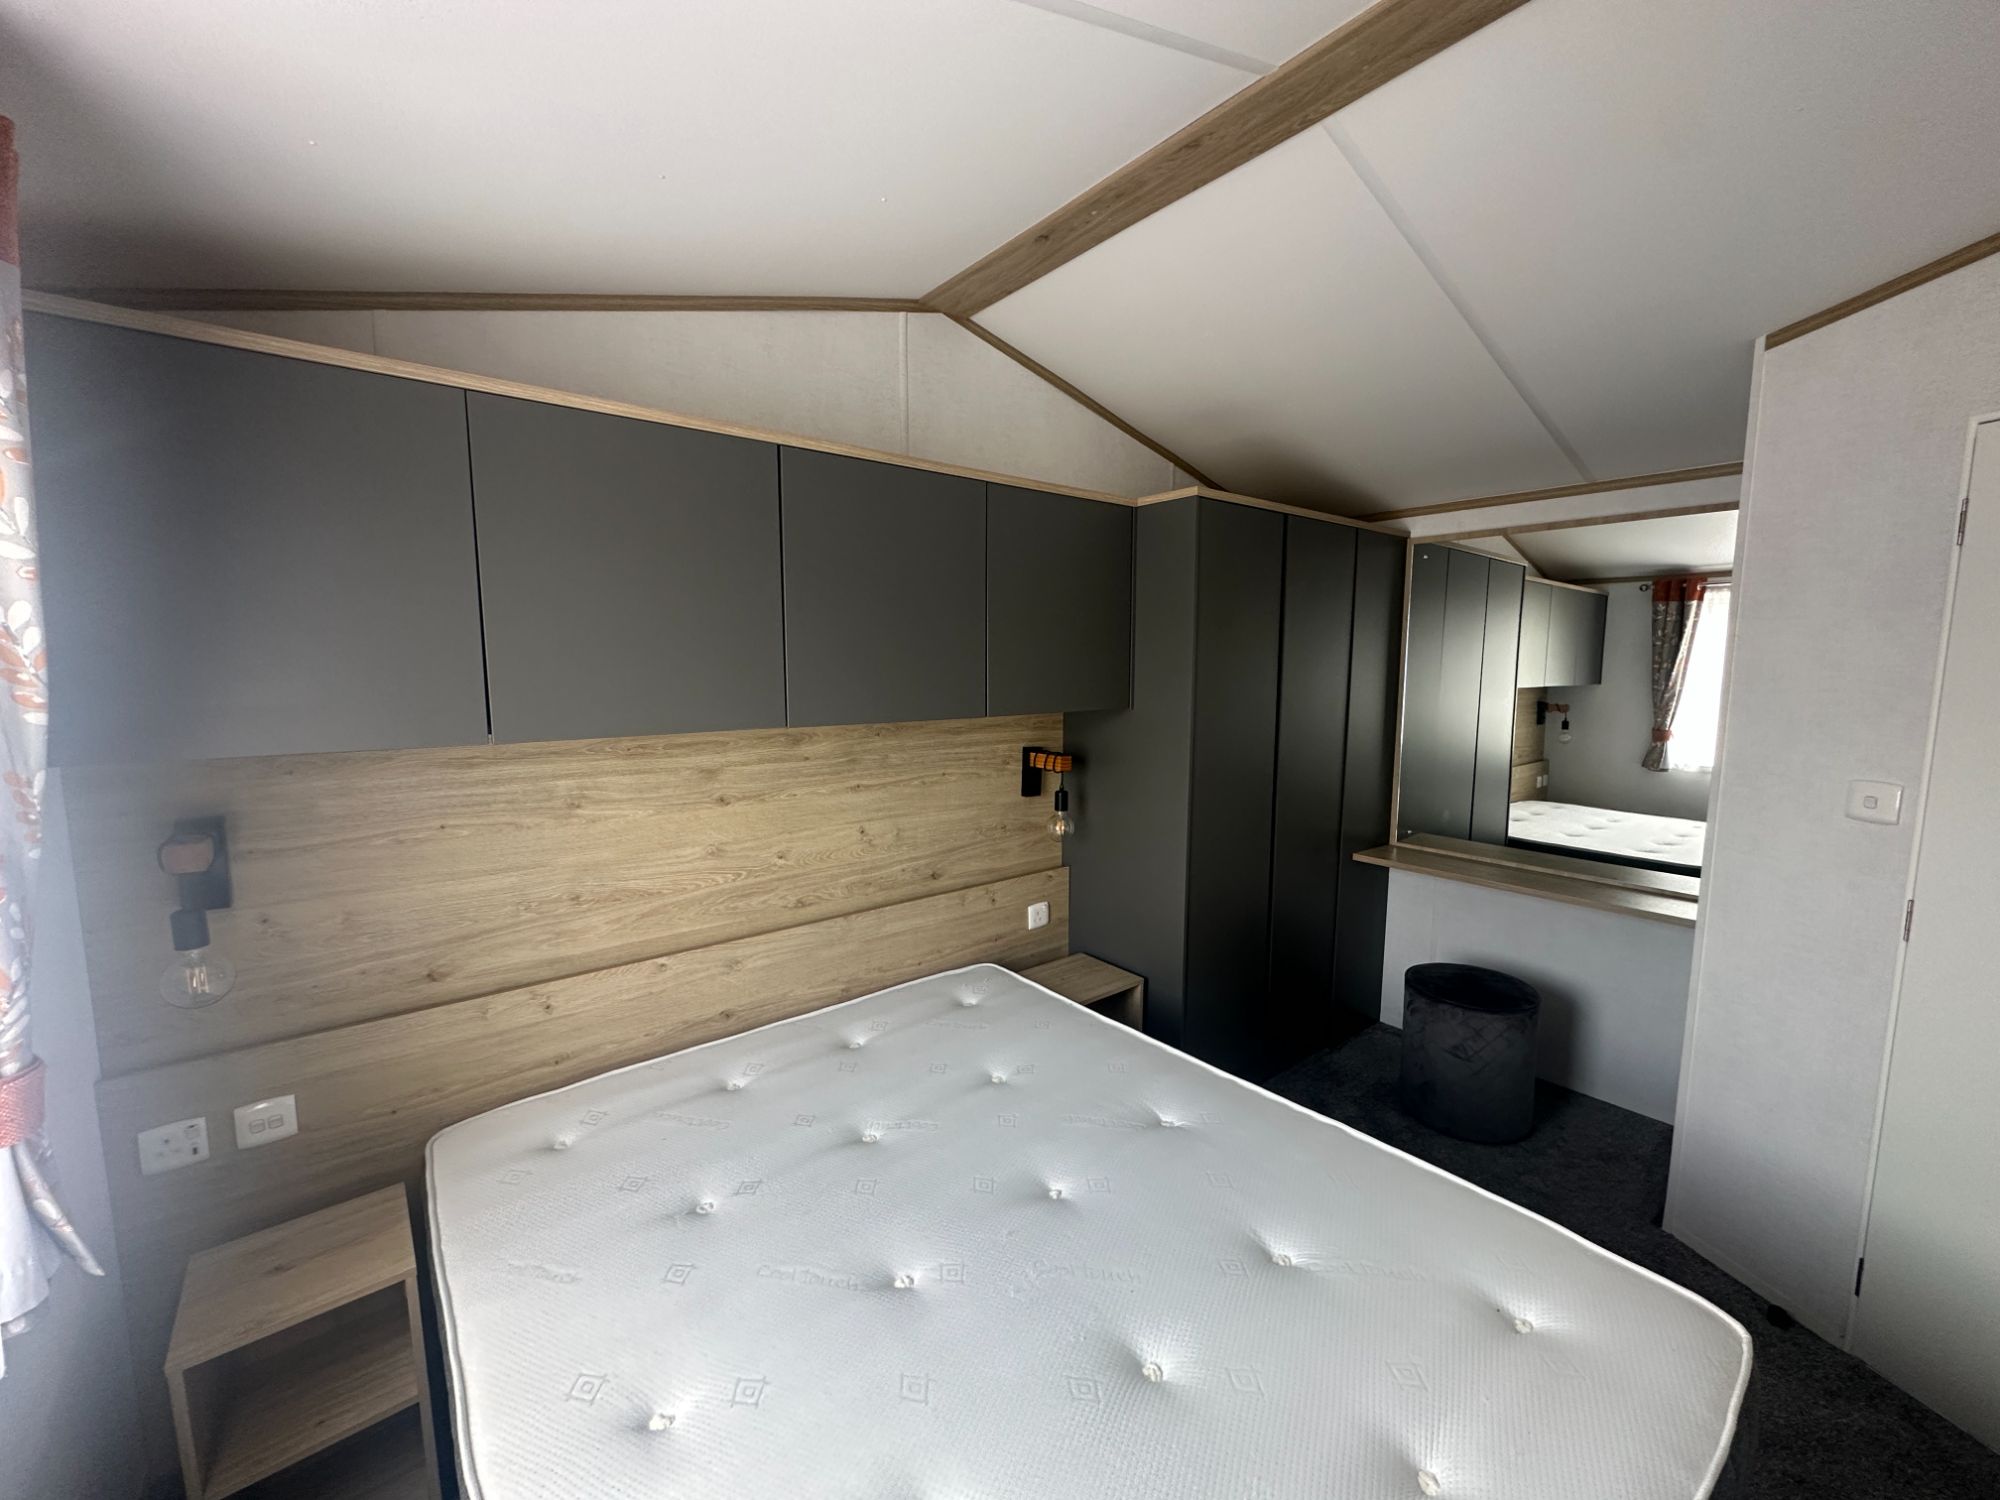 2021 Atlas Style Lodge Main Bed 2